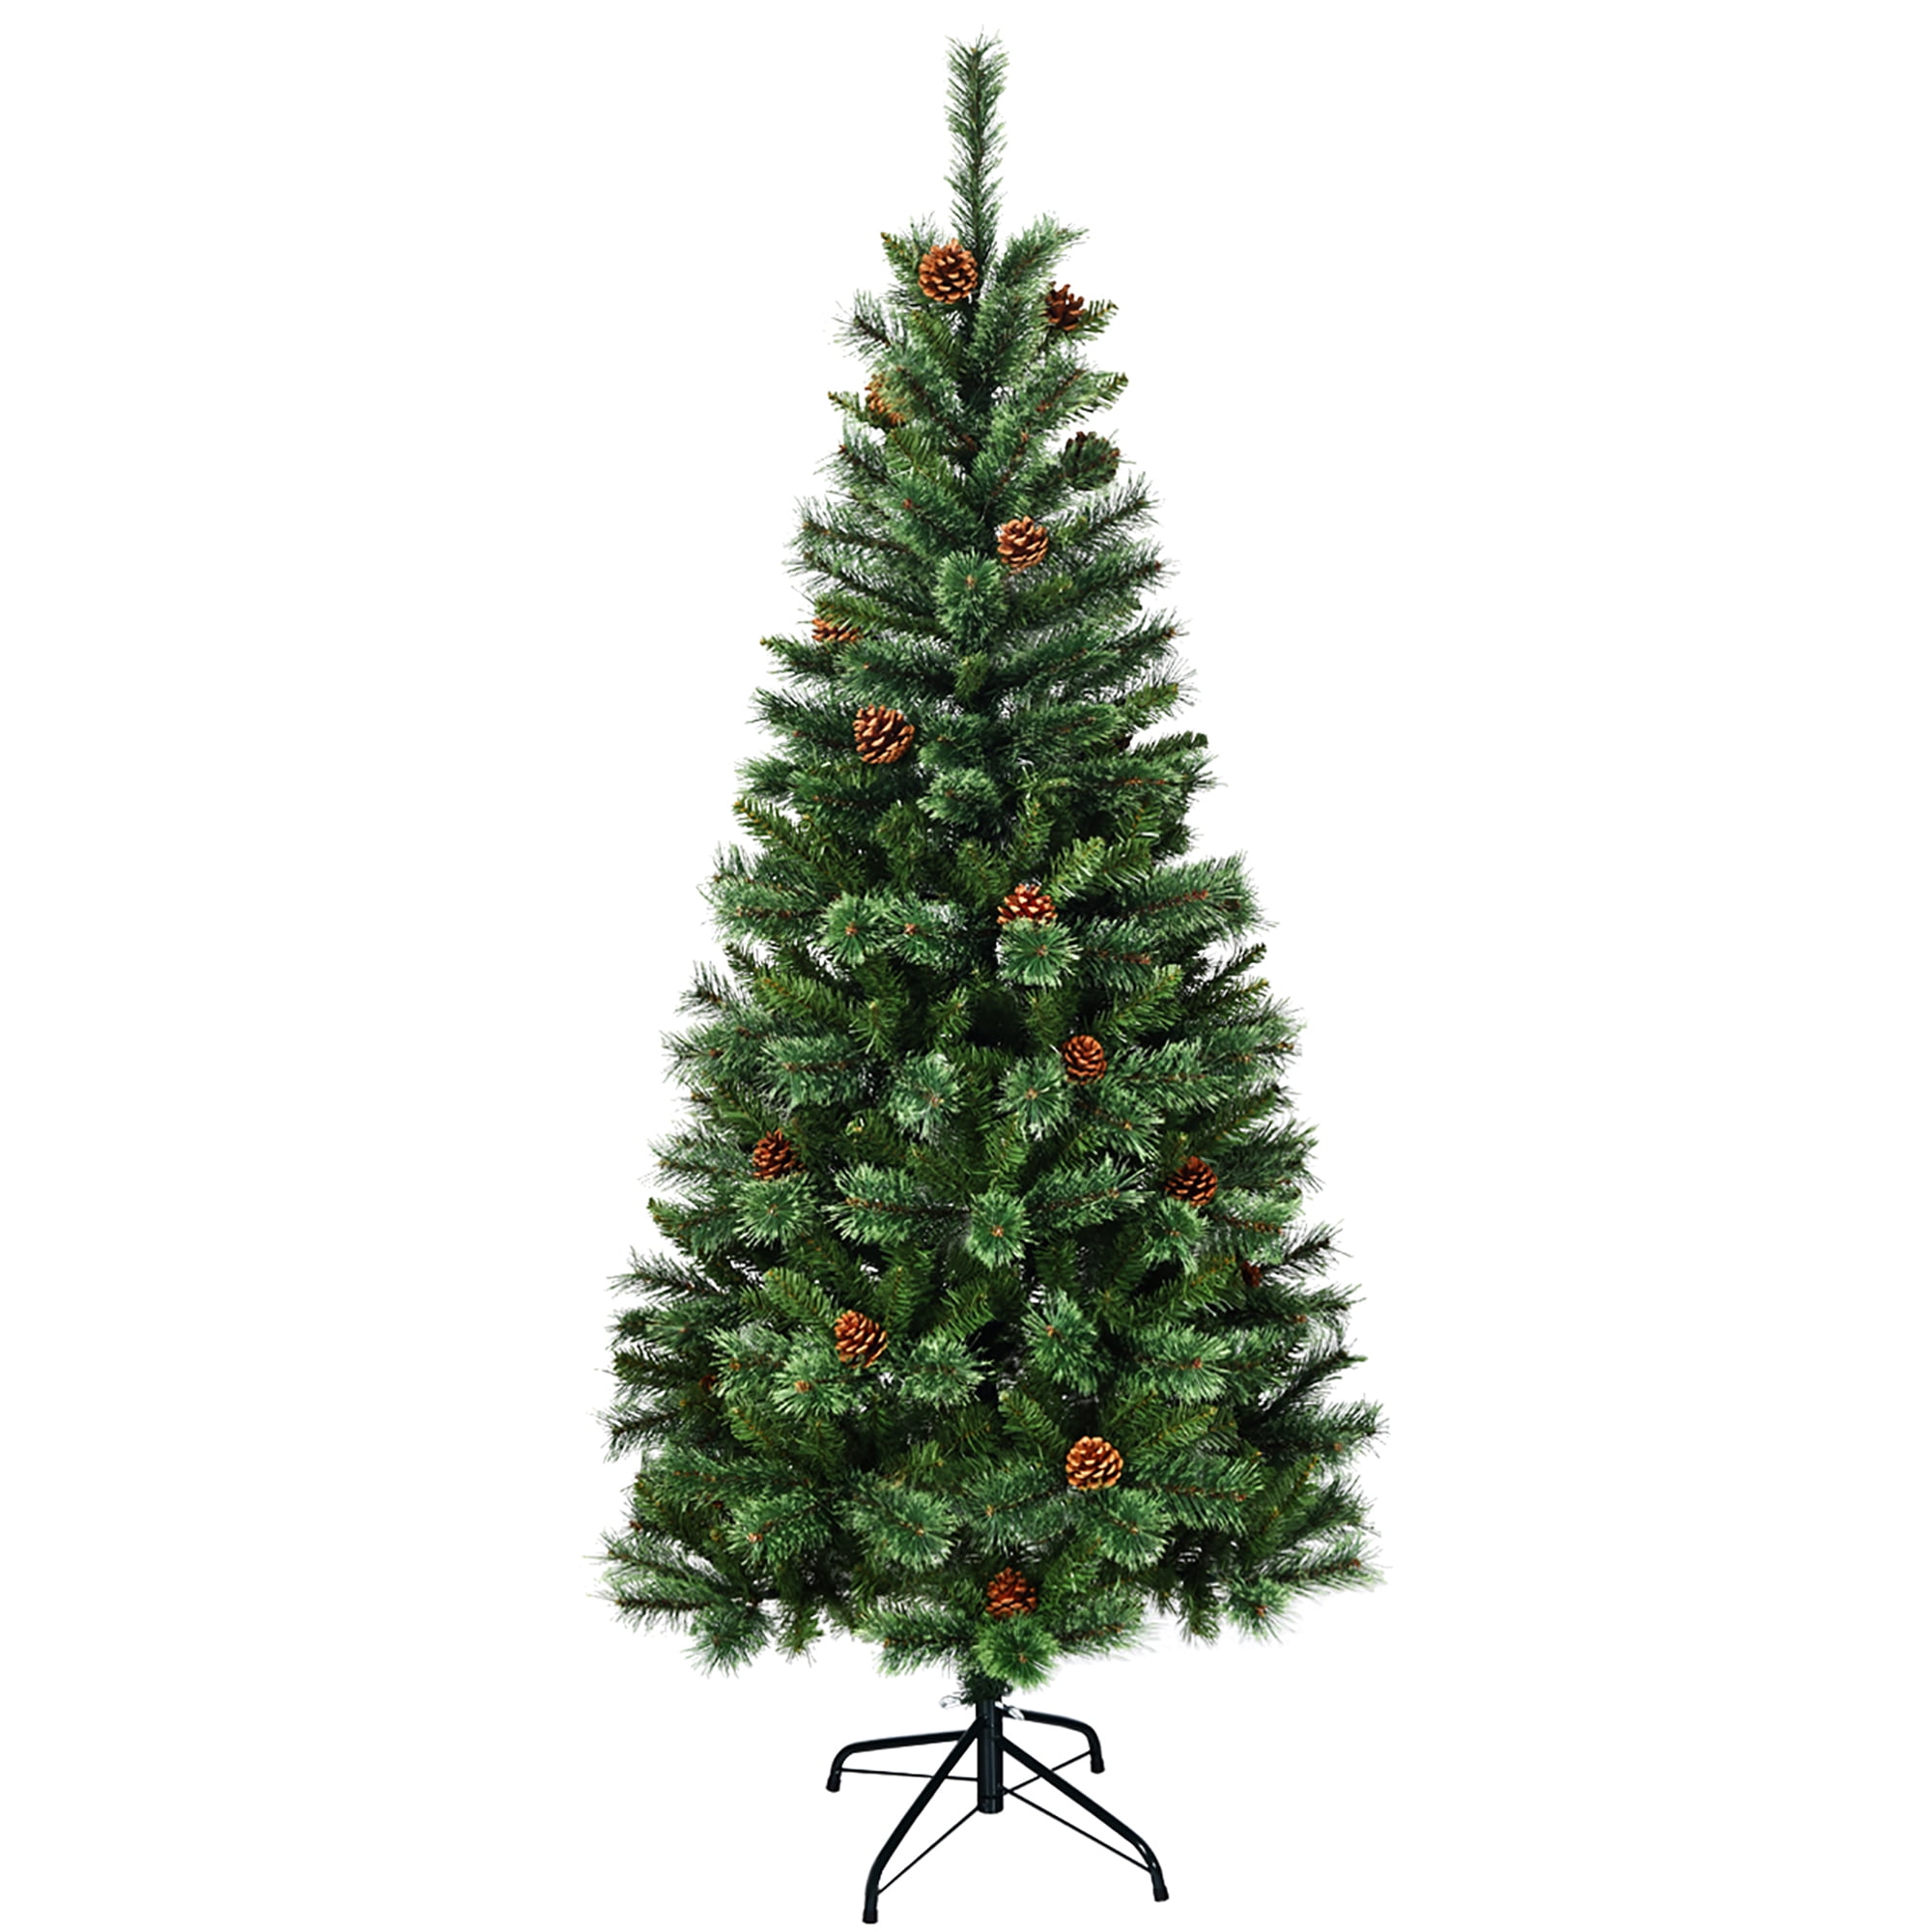 6ft 5ft 4ft Green Artificial Mixed Pine Christmas Tree Festive Xmas Decoration 